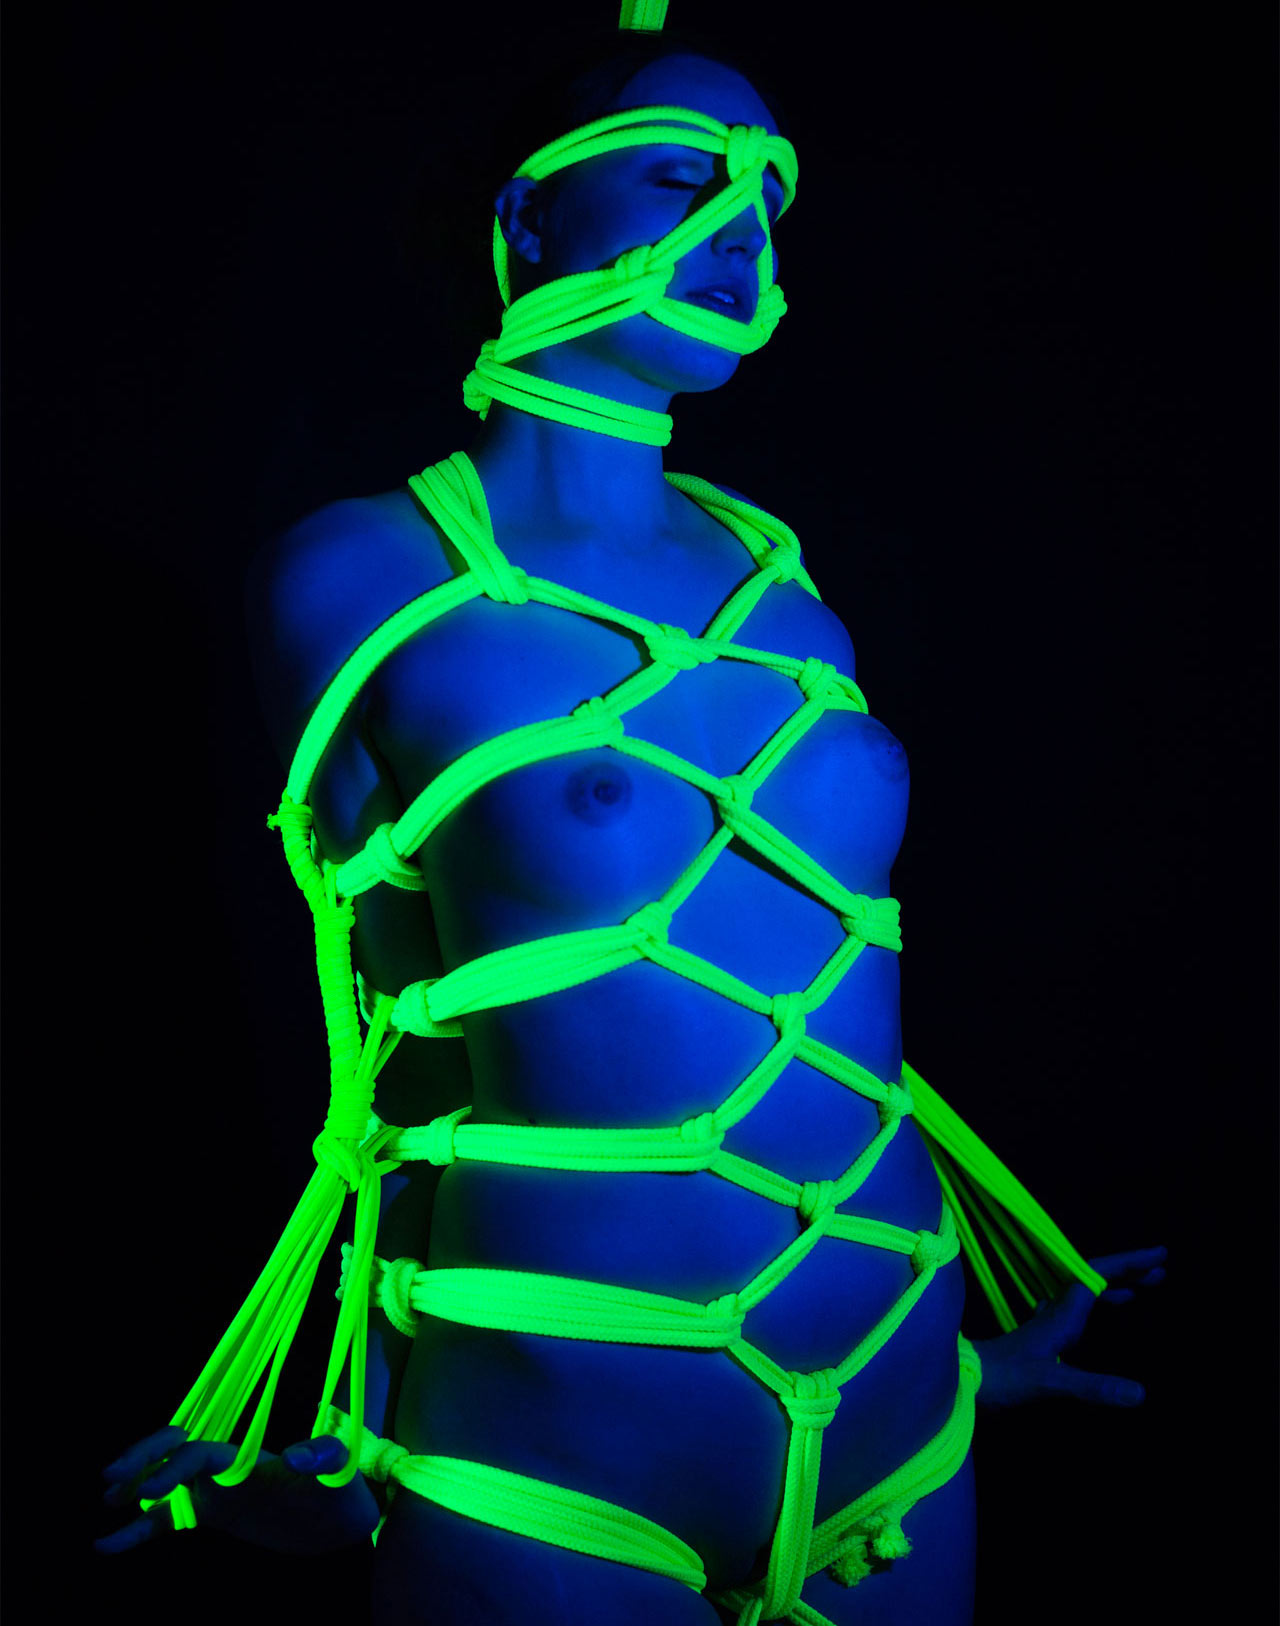 Bondage model DutchDame nude in black light Shibari by RopeMarks. Photo by Mew-Chiel.